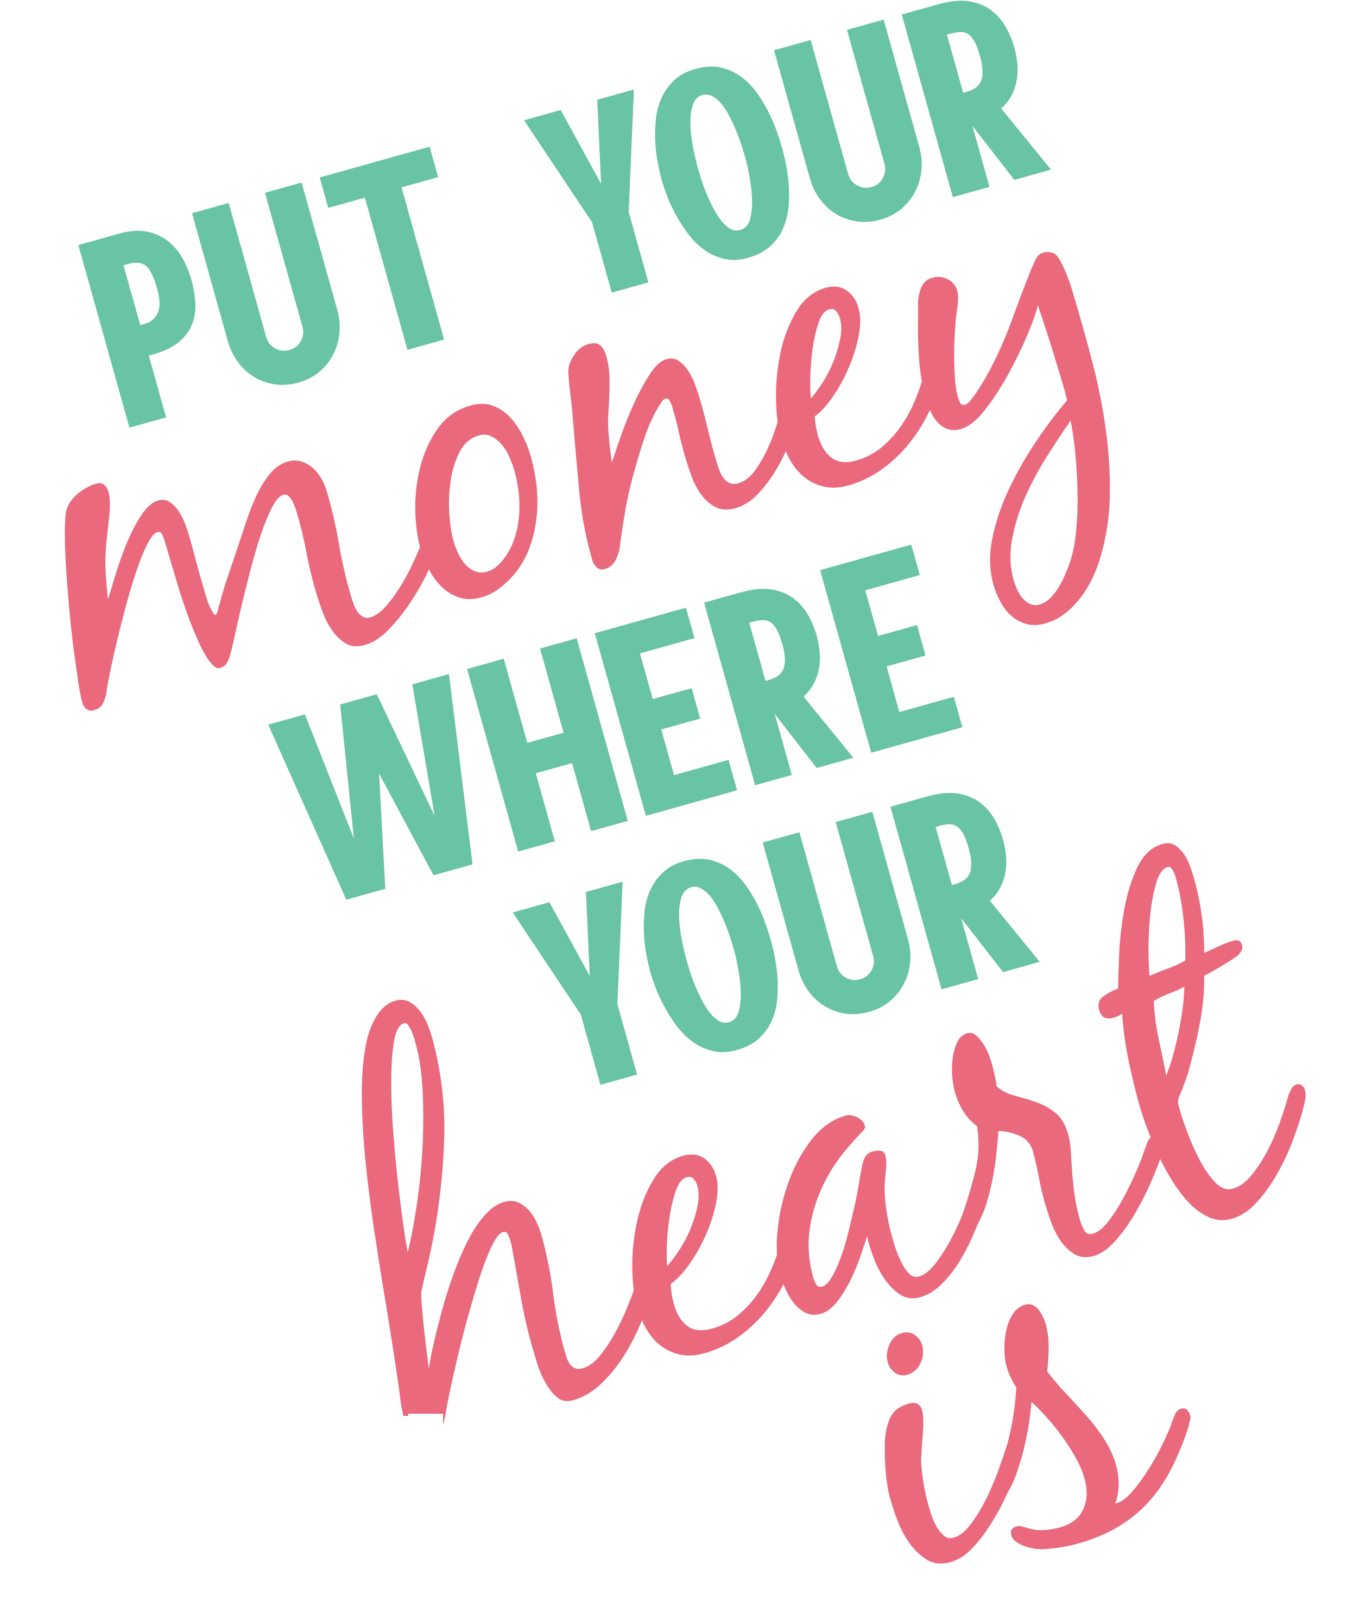 Put your money where your heart is and support Small Businesses in Downtown Missoula